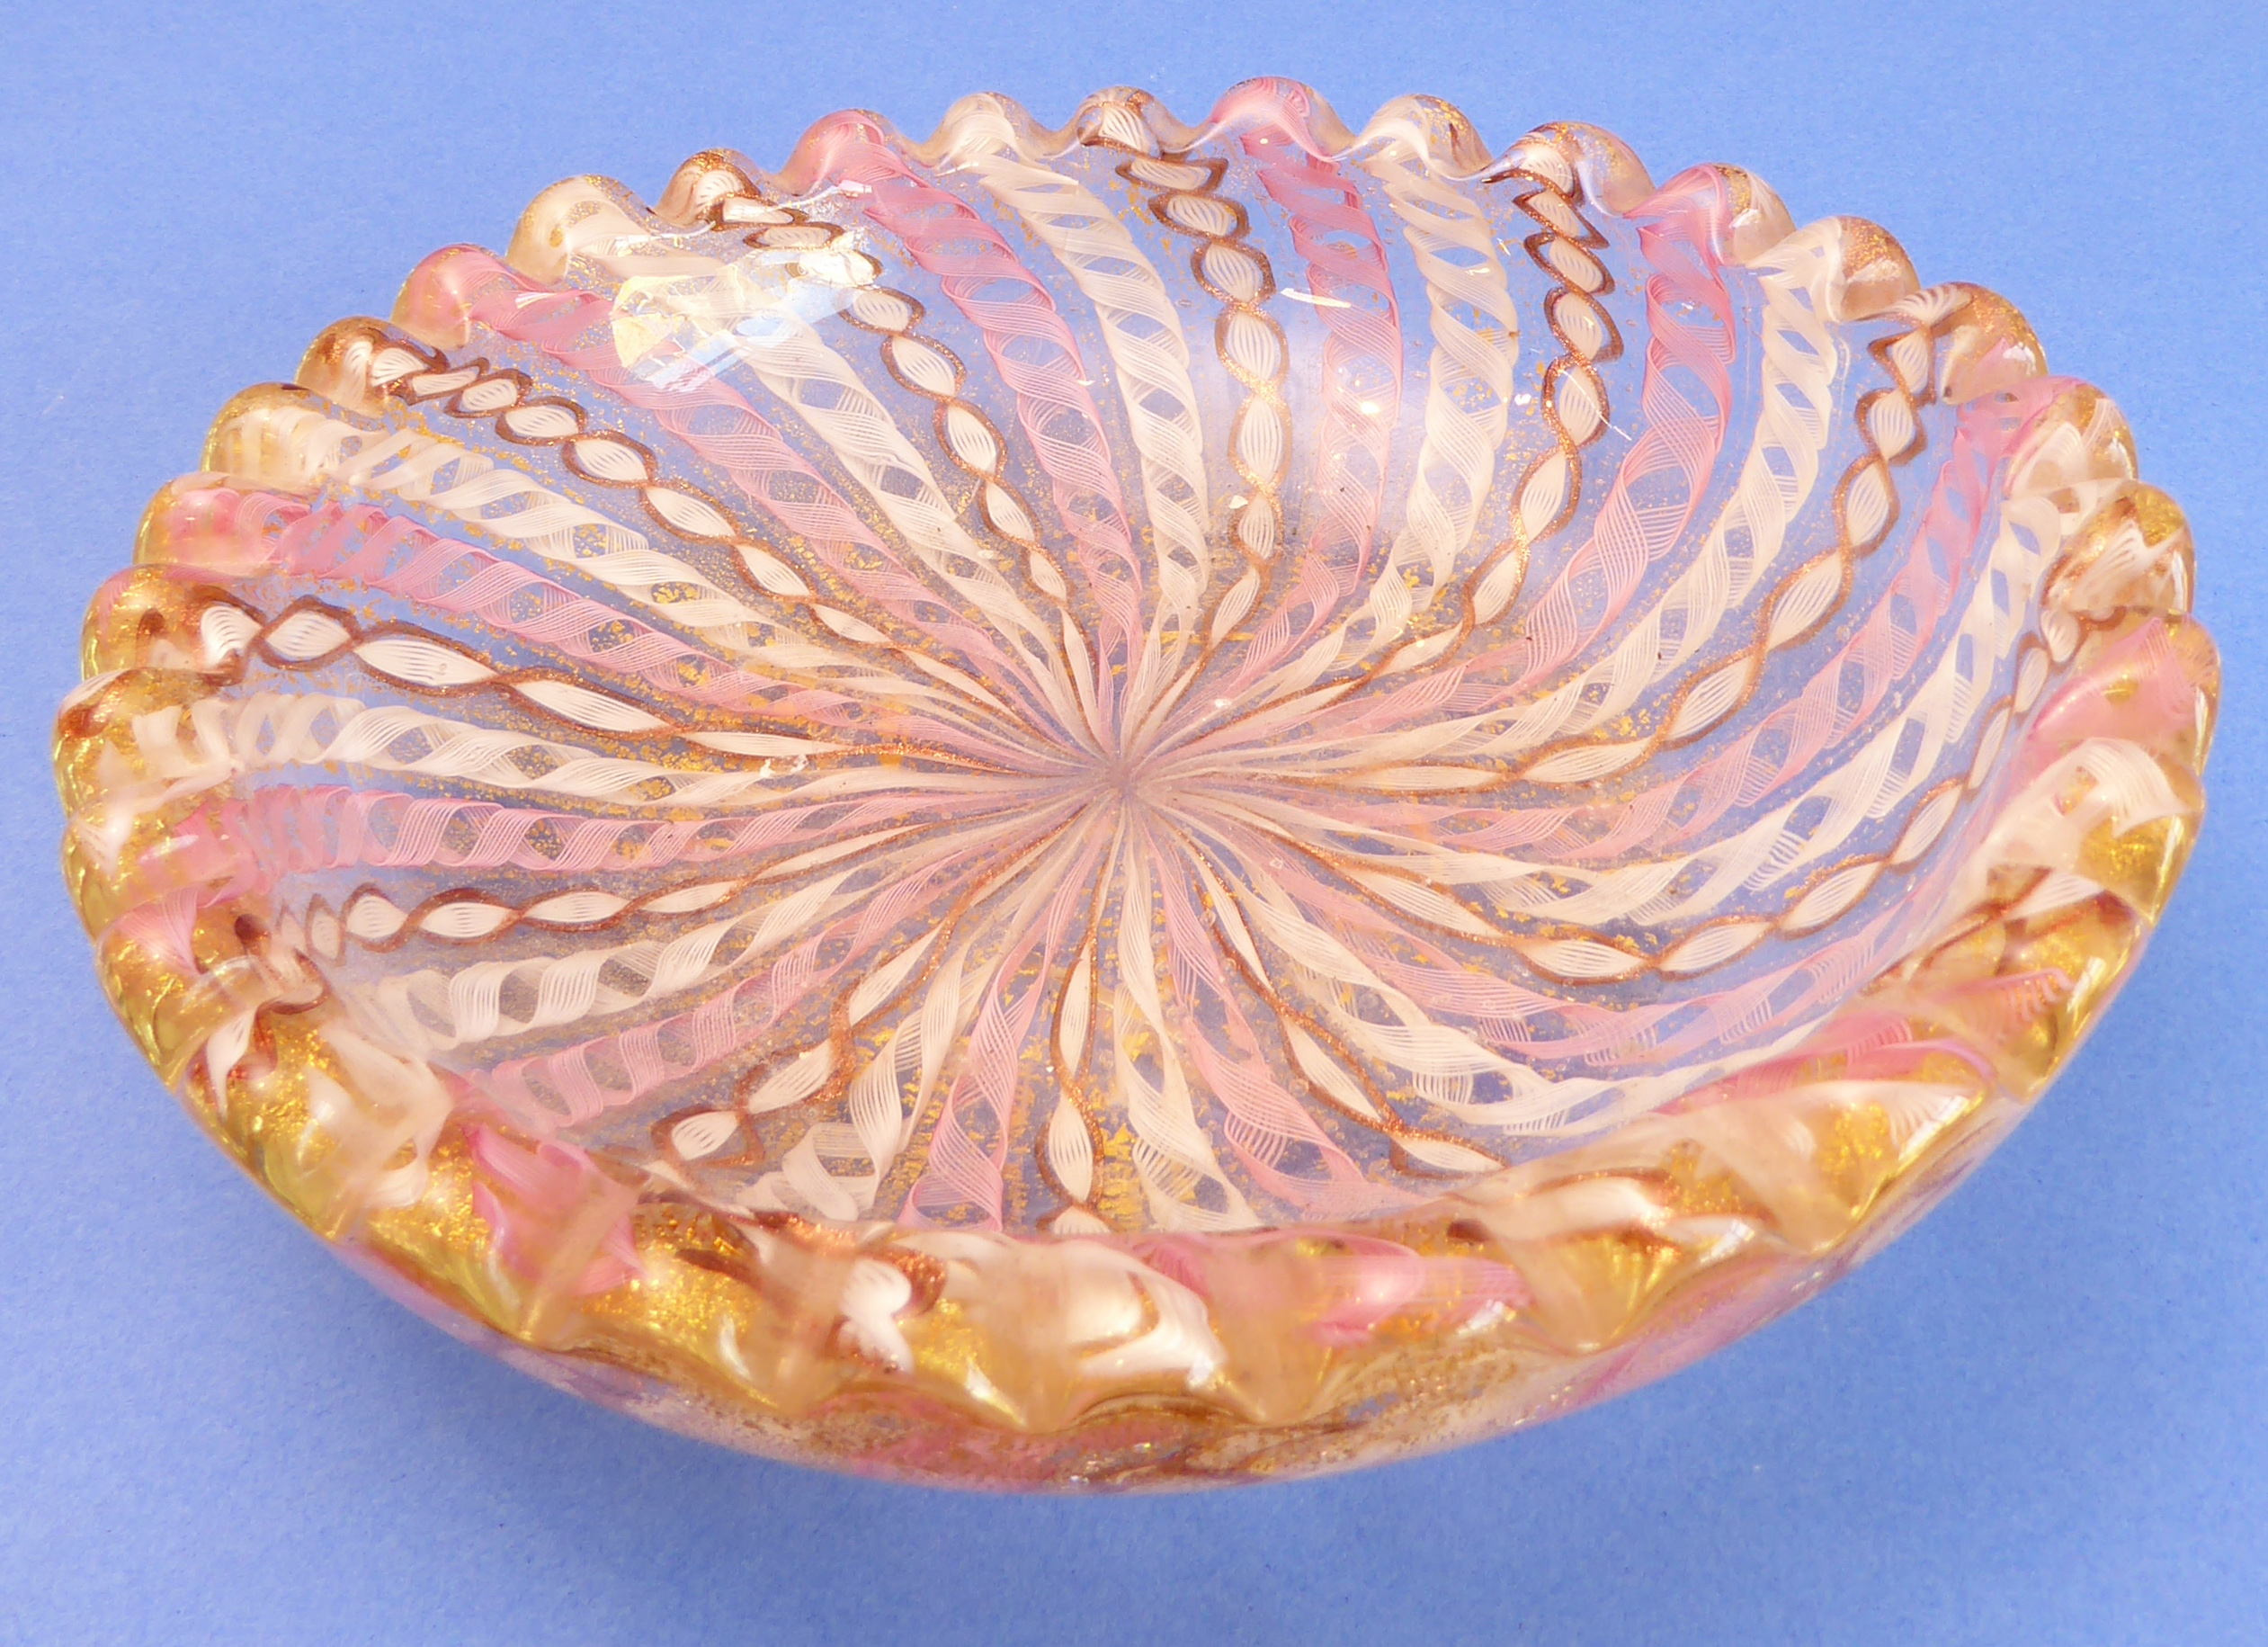 A 19th century latticinio-style heavy glass bowl decorated with alternating pink, white and husk-